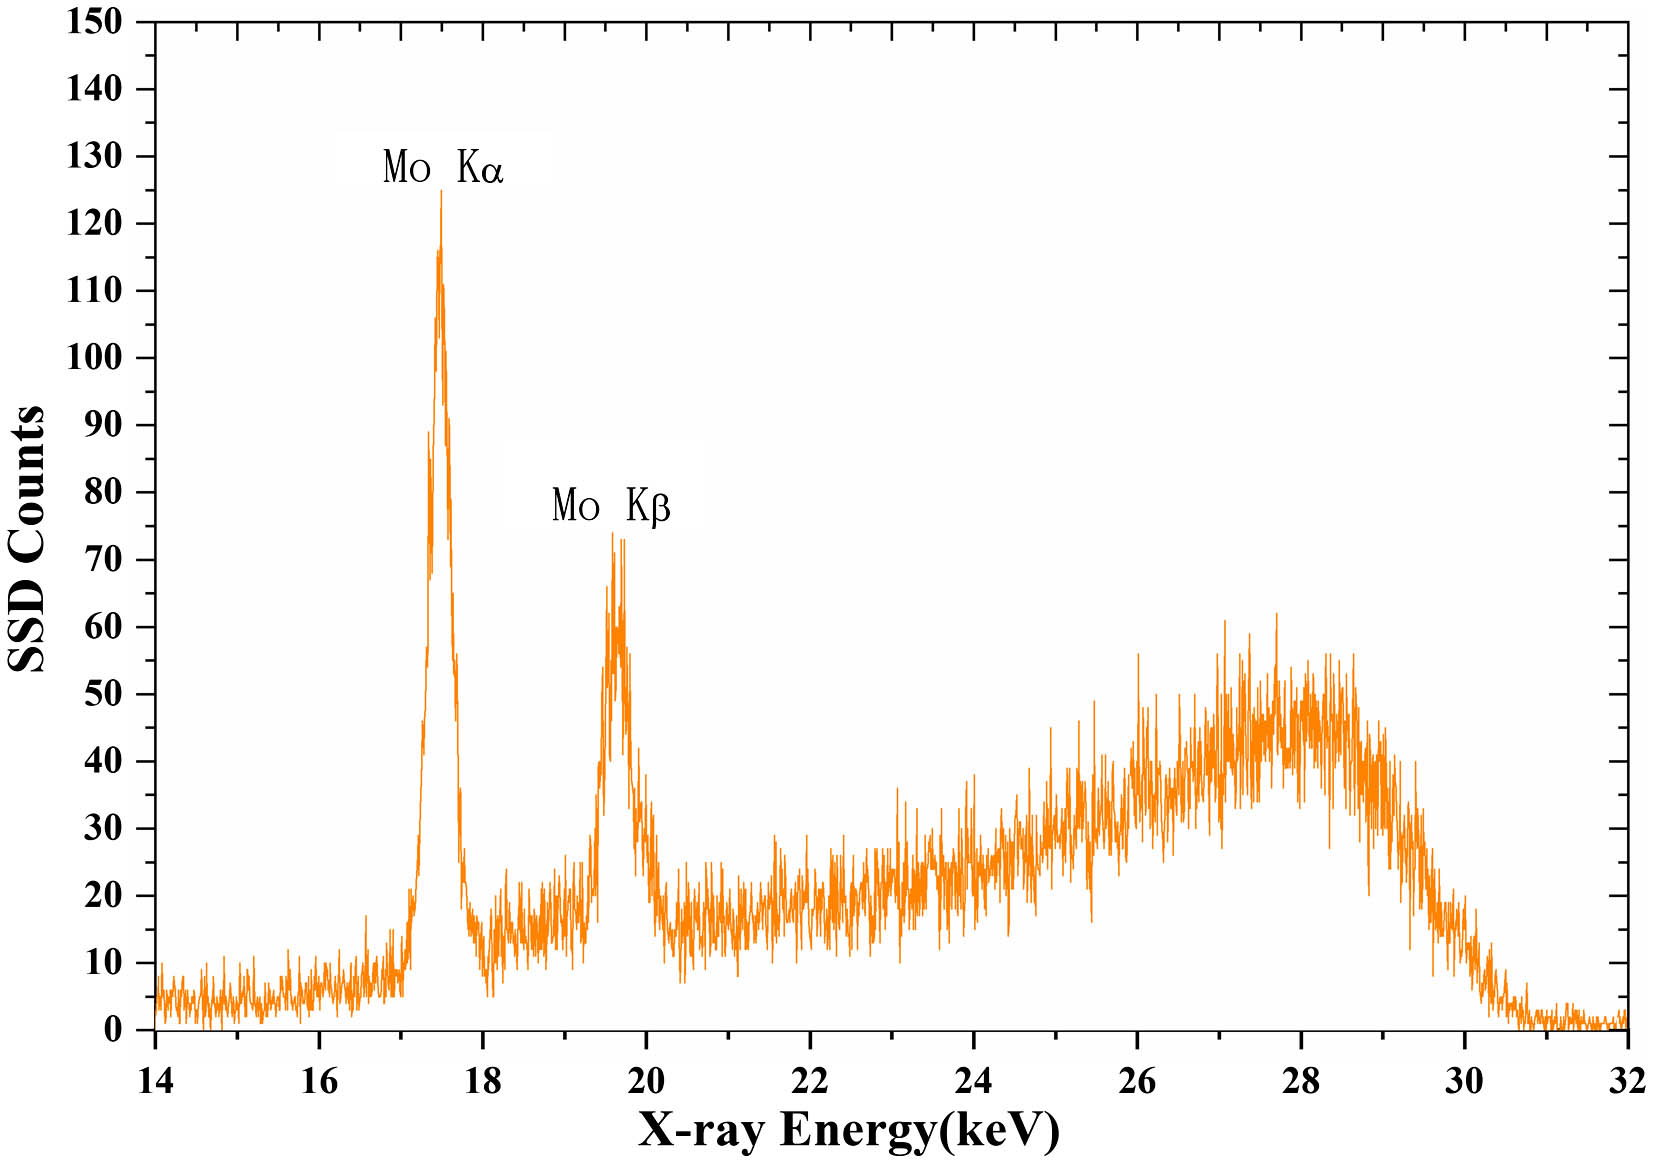 Distribution of the X-ray energy spectrum from a Mo target.